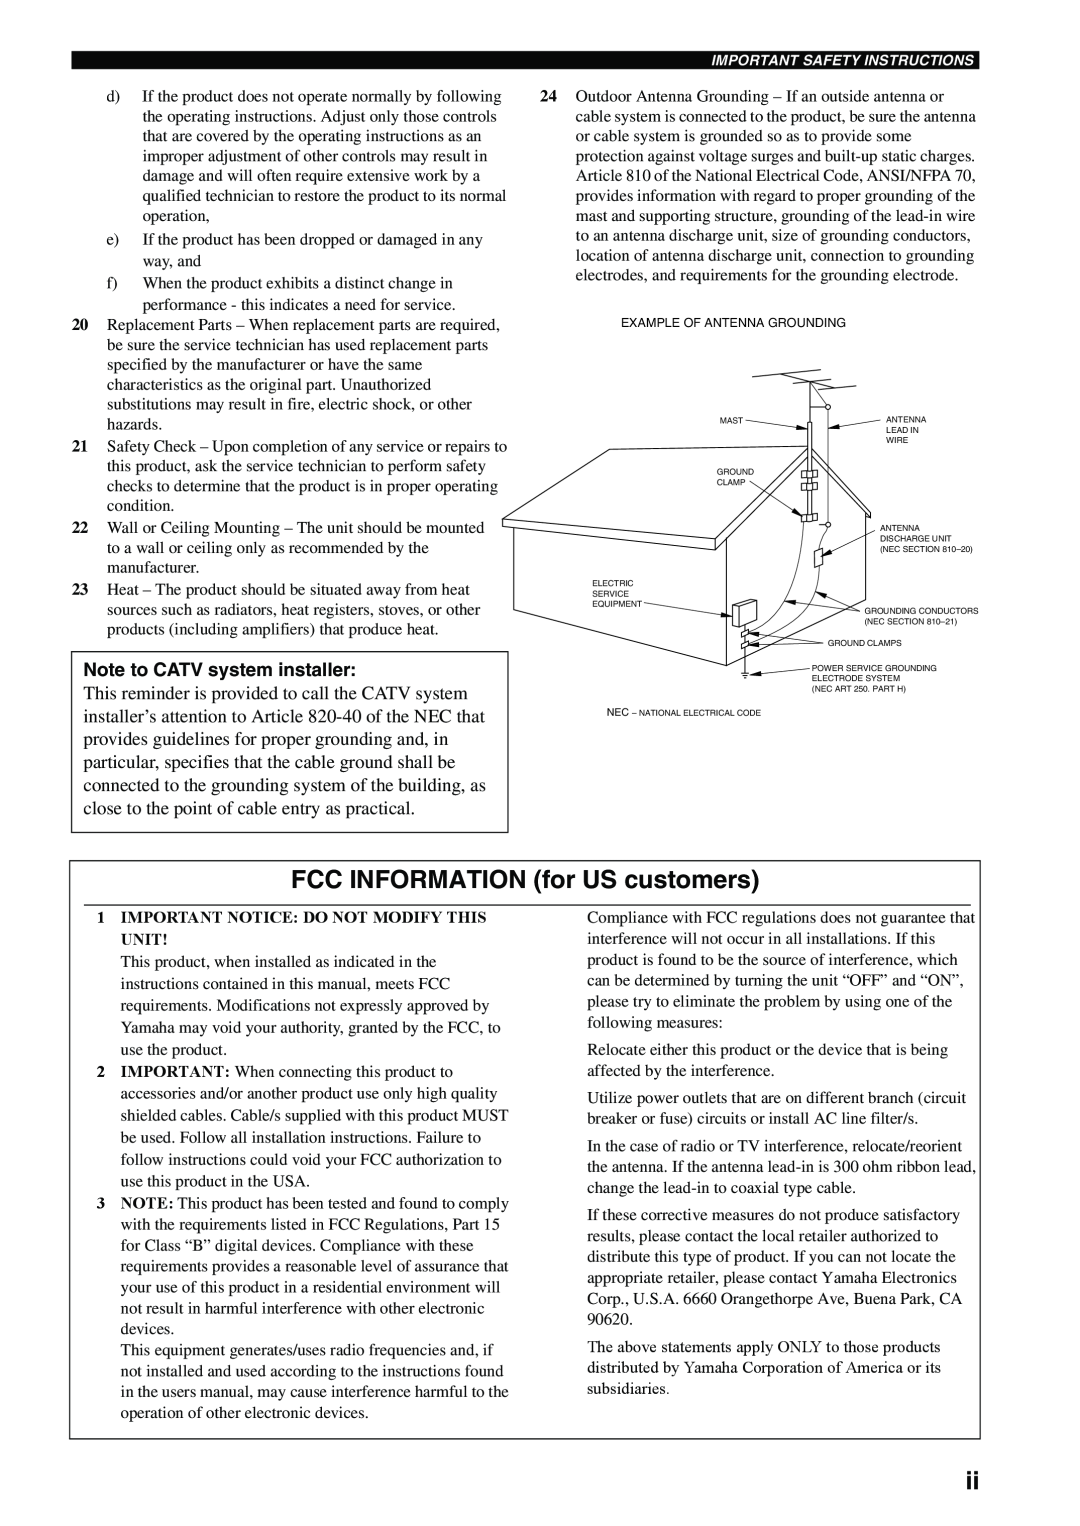 Yamaha HTR-5990 owner manual FCC INFORMATION for US customers, Note to CATV system installer 